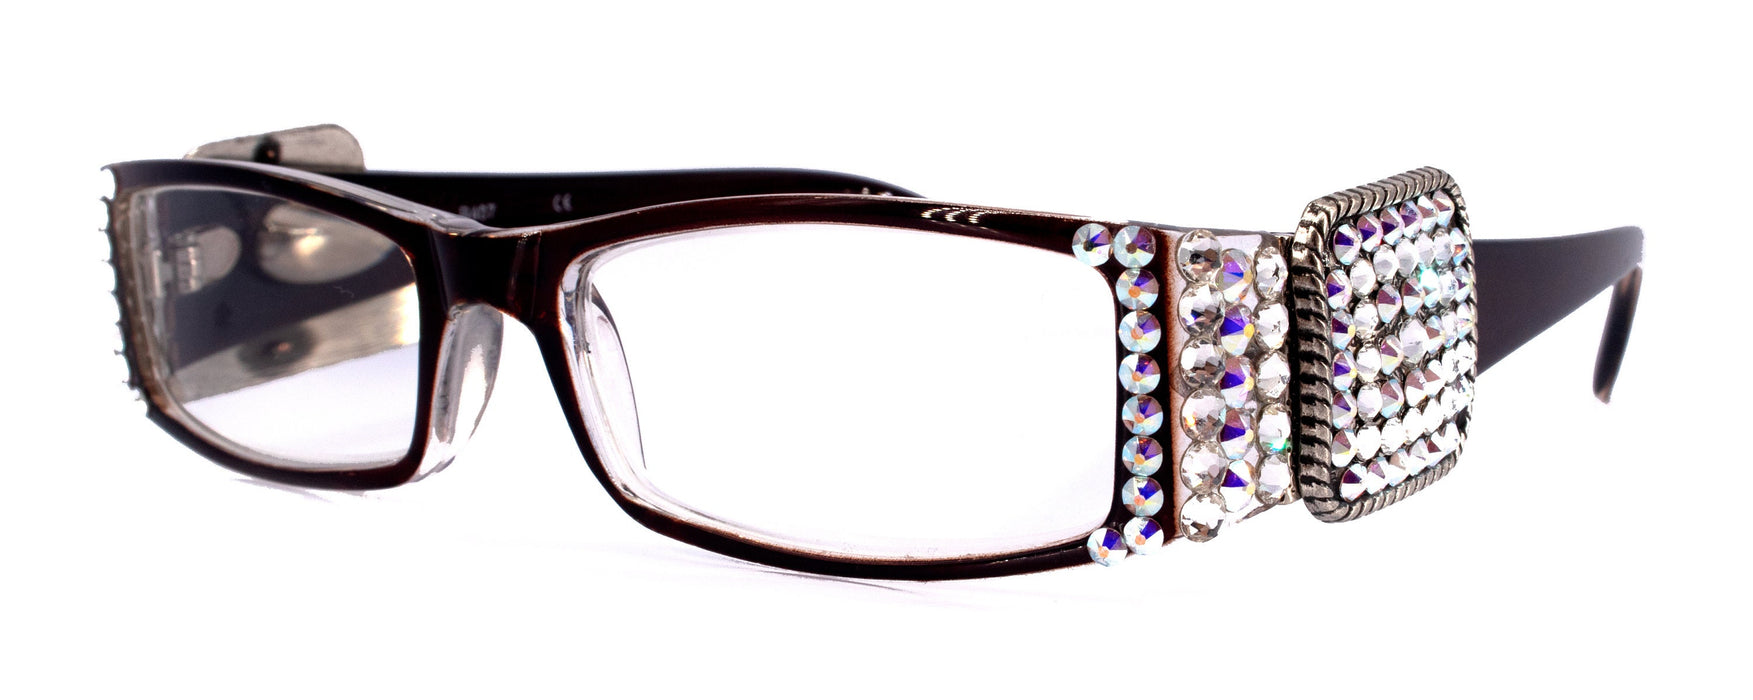 The Medallion, (Bling) Reading Glasses Women W (Clear, AB ) Genuine European Crystals (Wine Red) Western Concho, NY Fifth Avenue